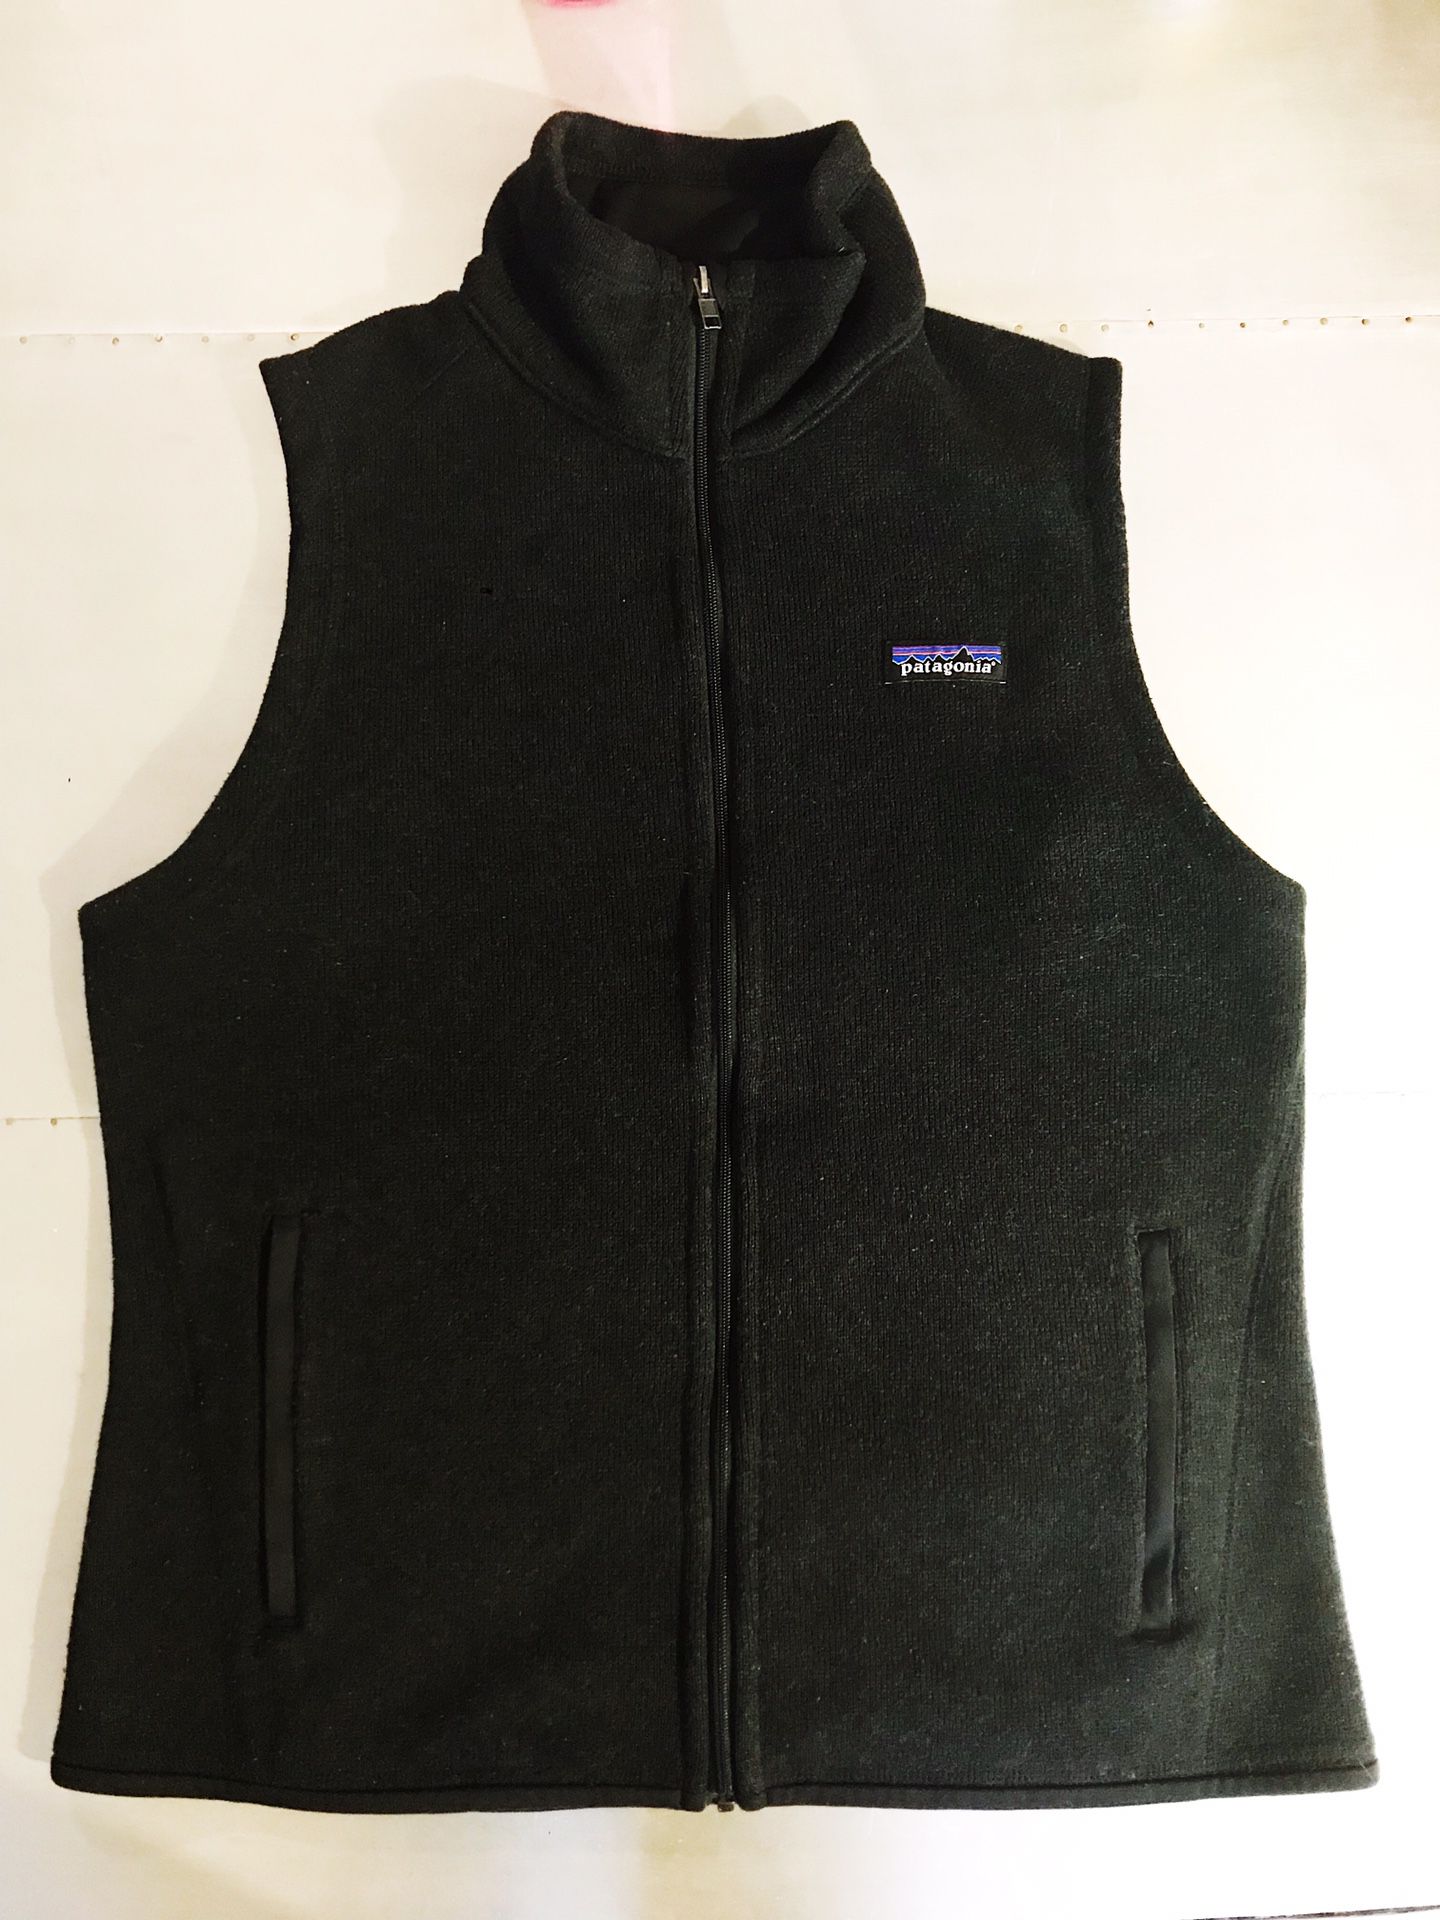 Awesome and comfy women’s Patagonia vest!